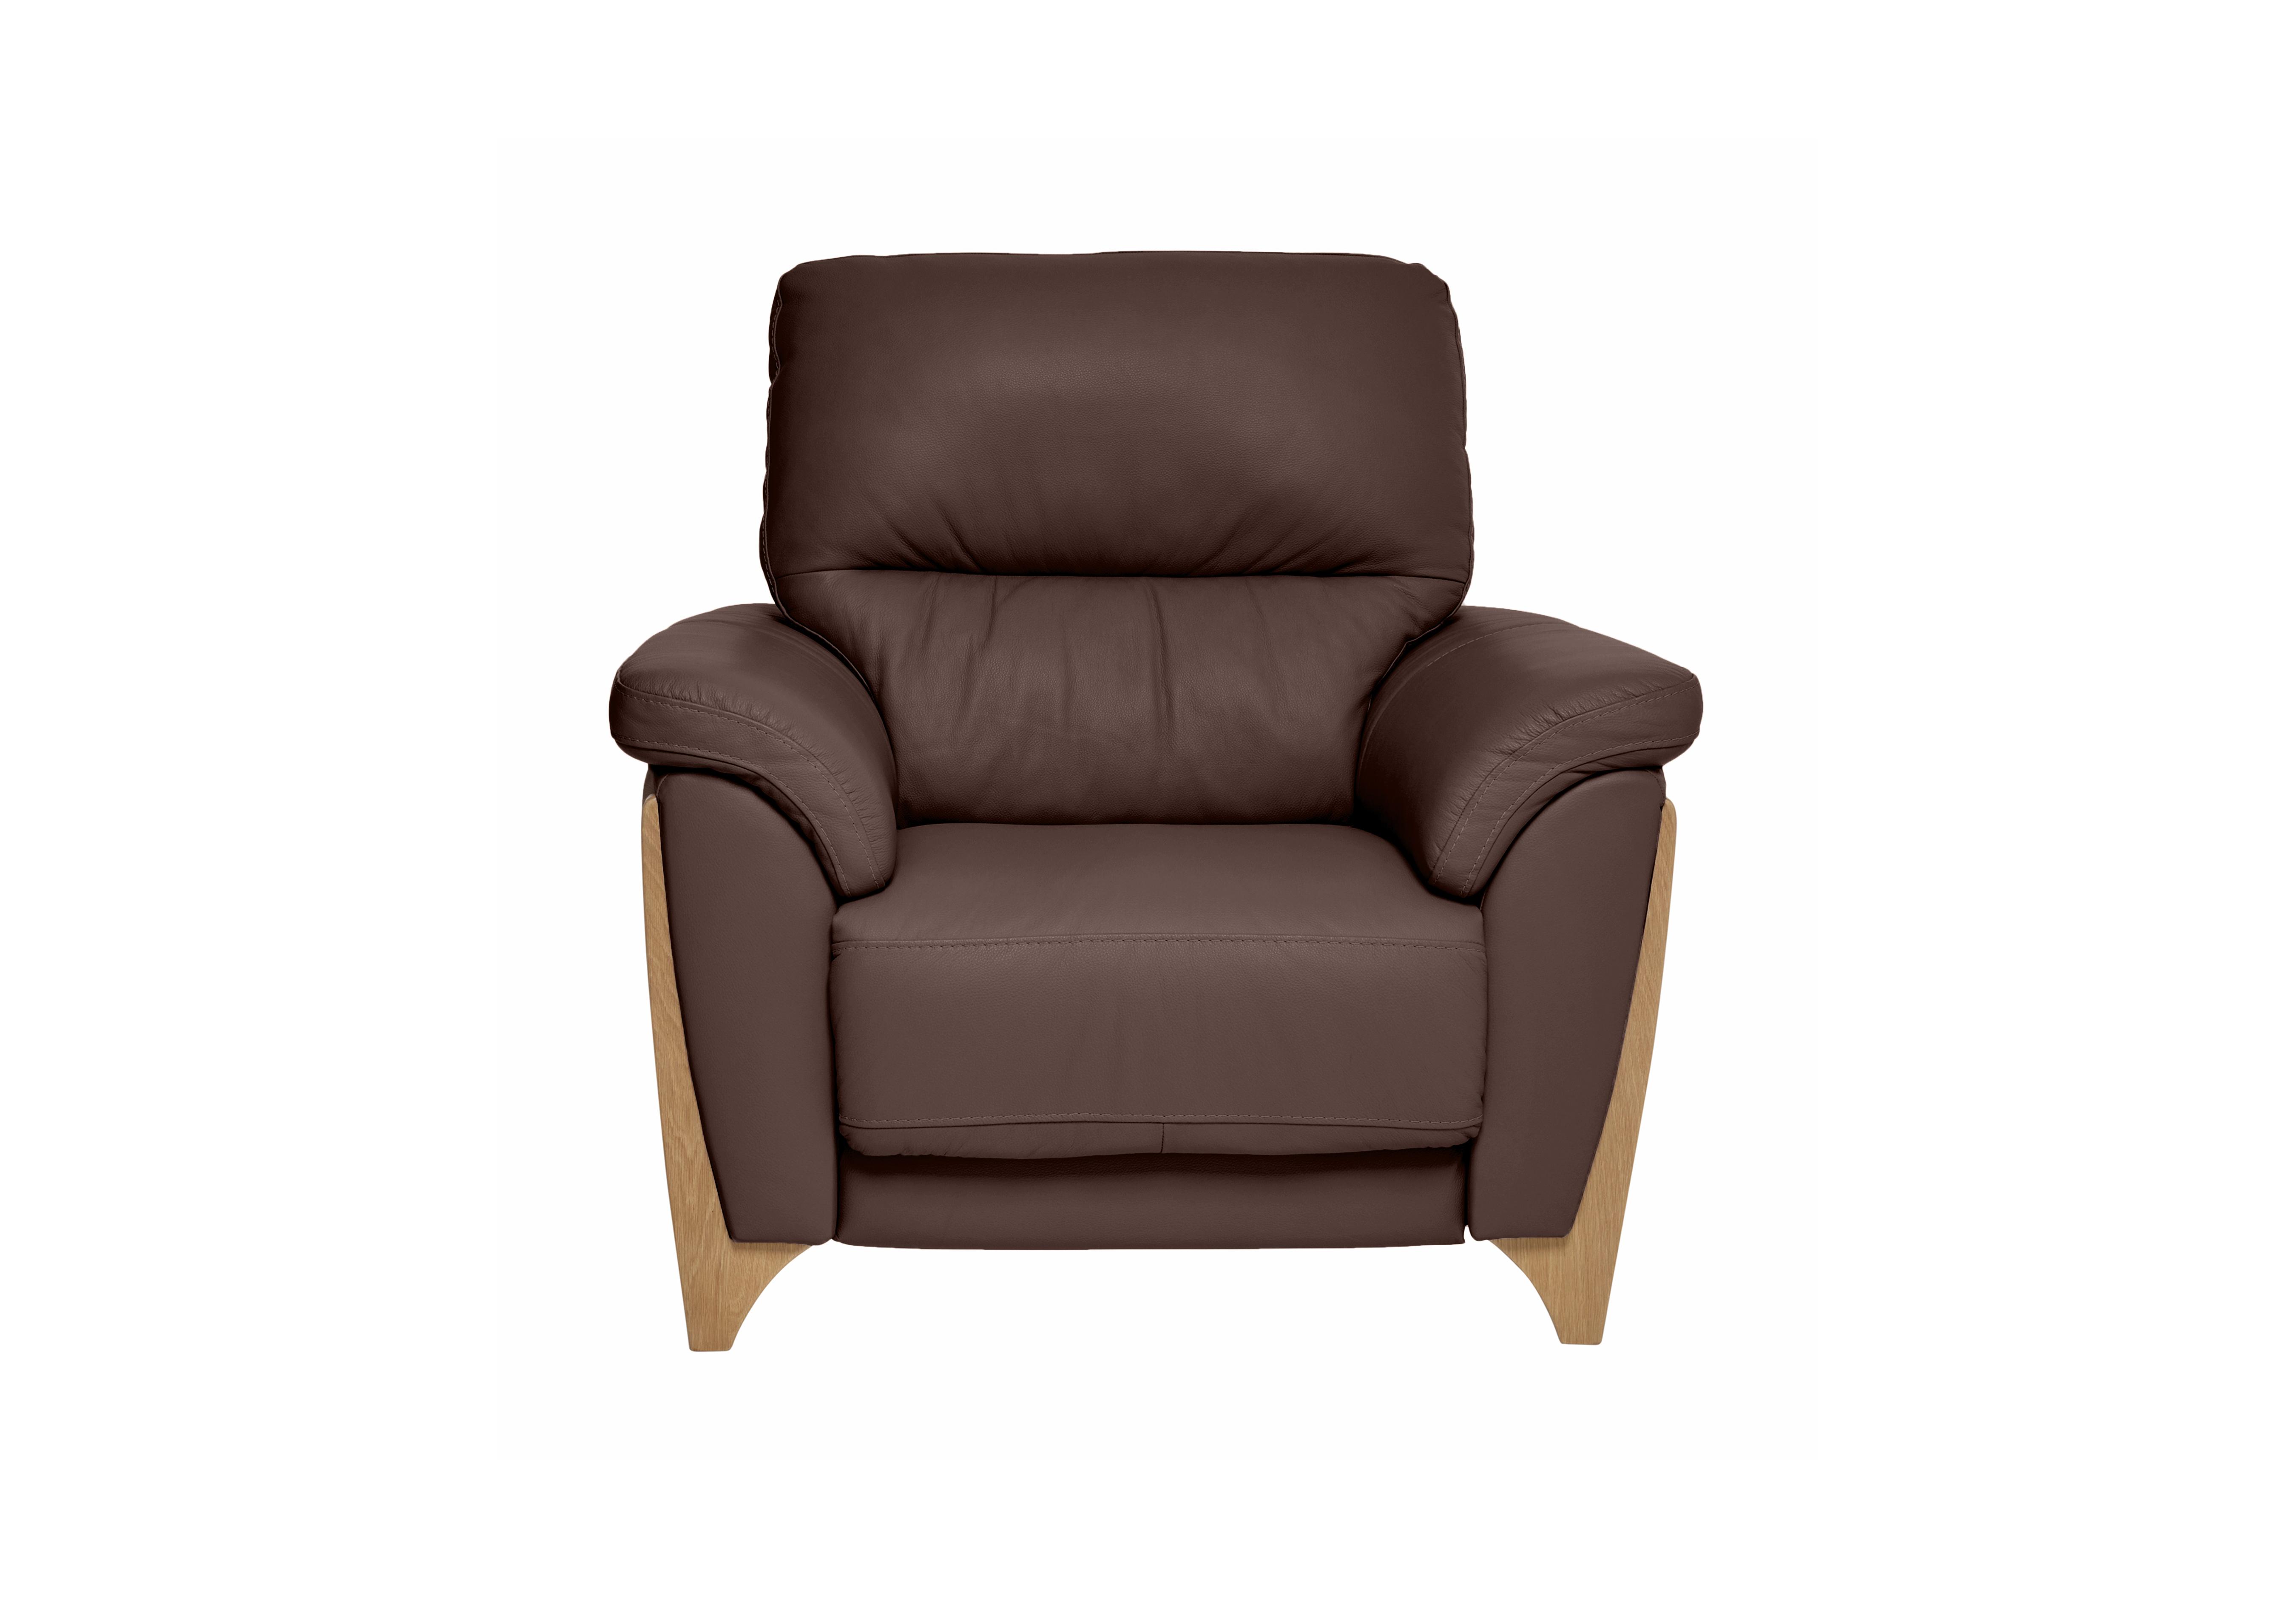 Enna Leather Armchair in L901 on Furniture Village